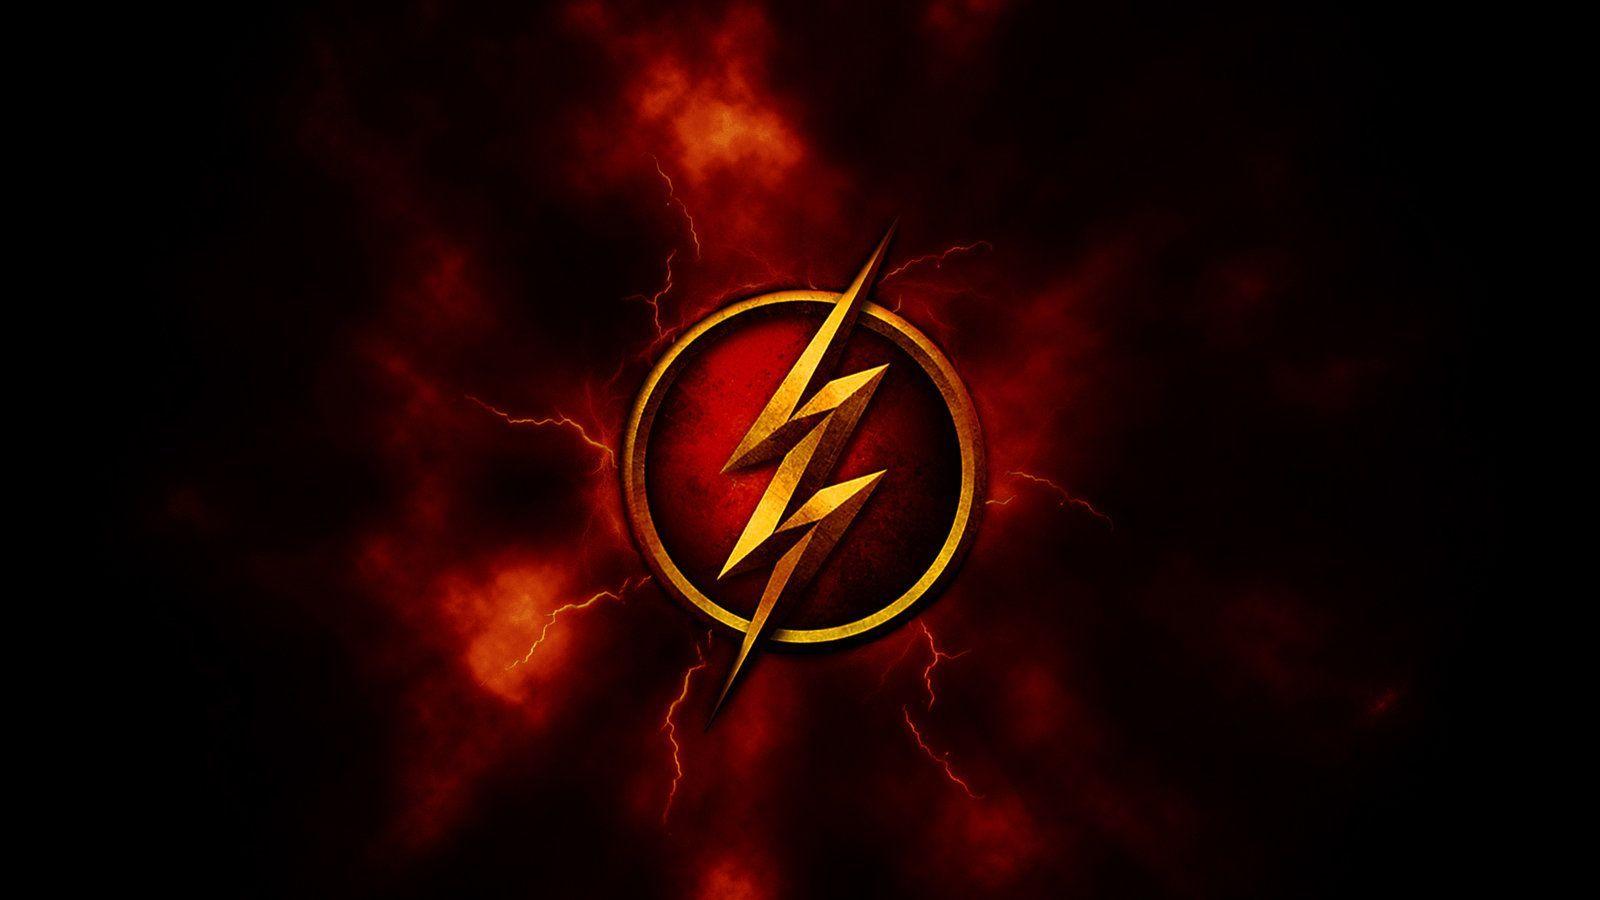 Barry Allen the Flash wallpaper HD free Download 1600×884 The Flash